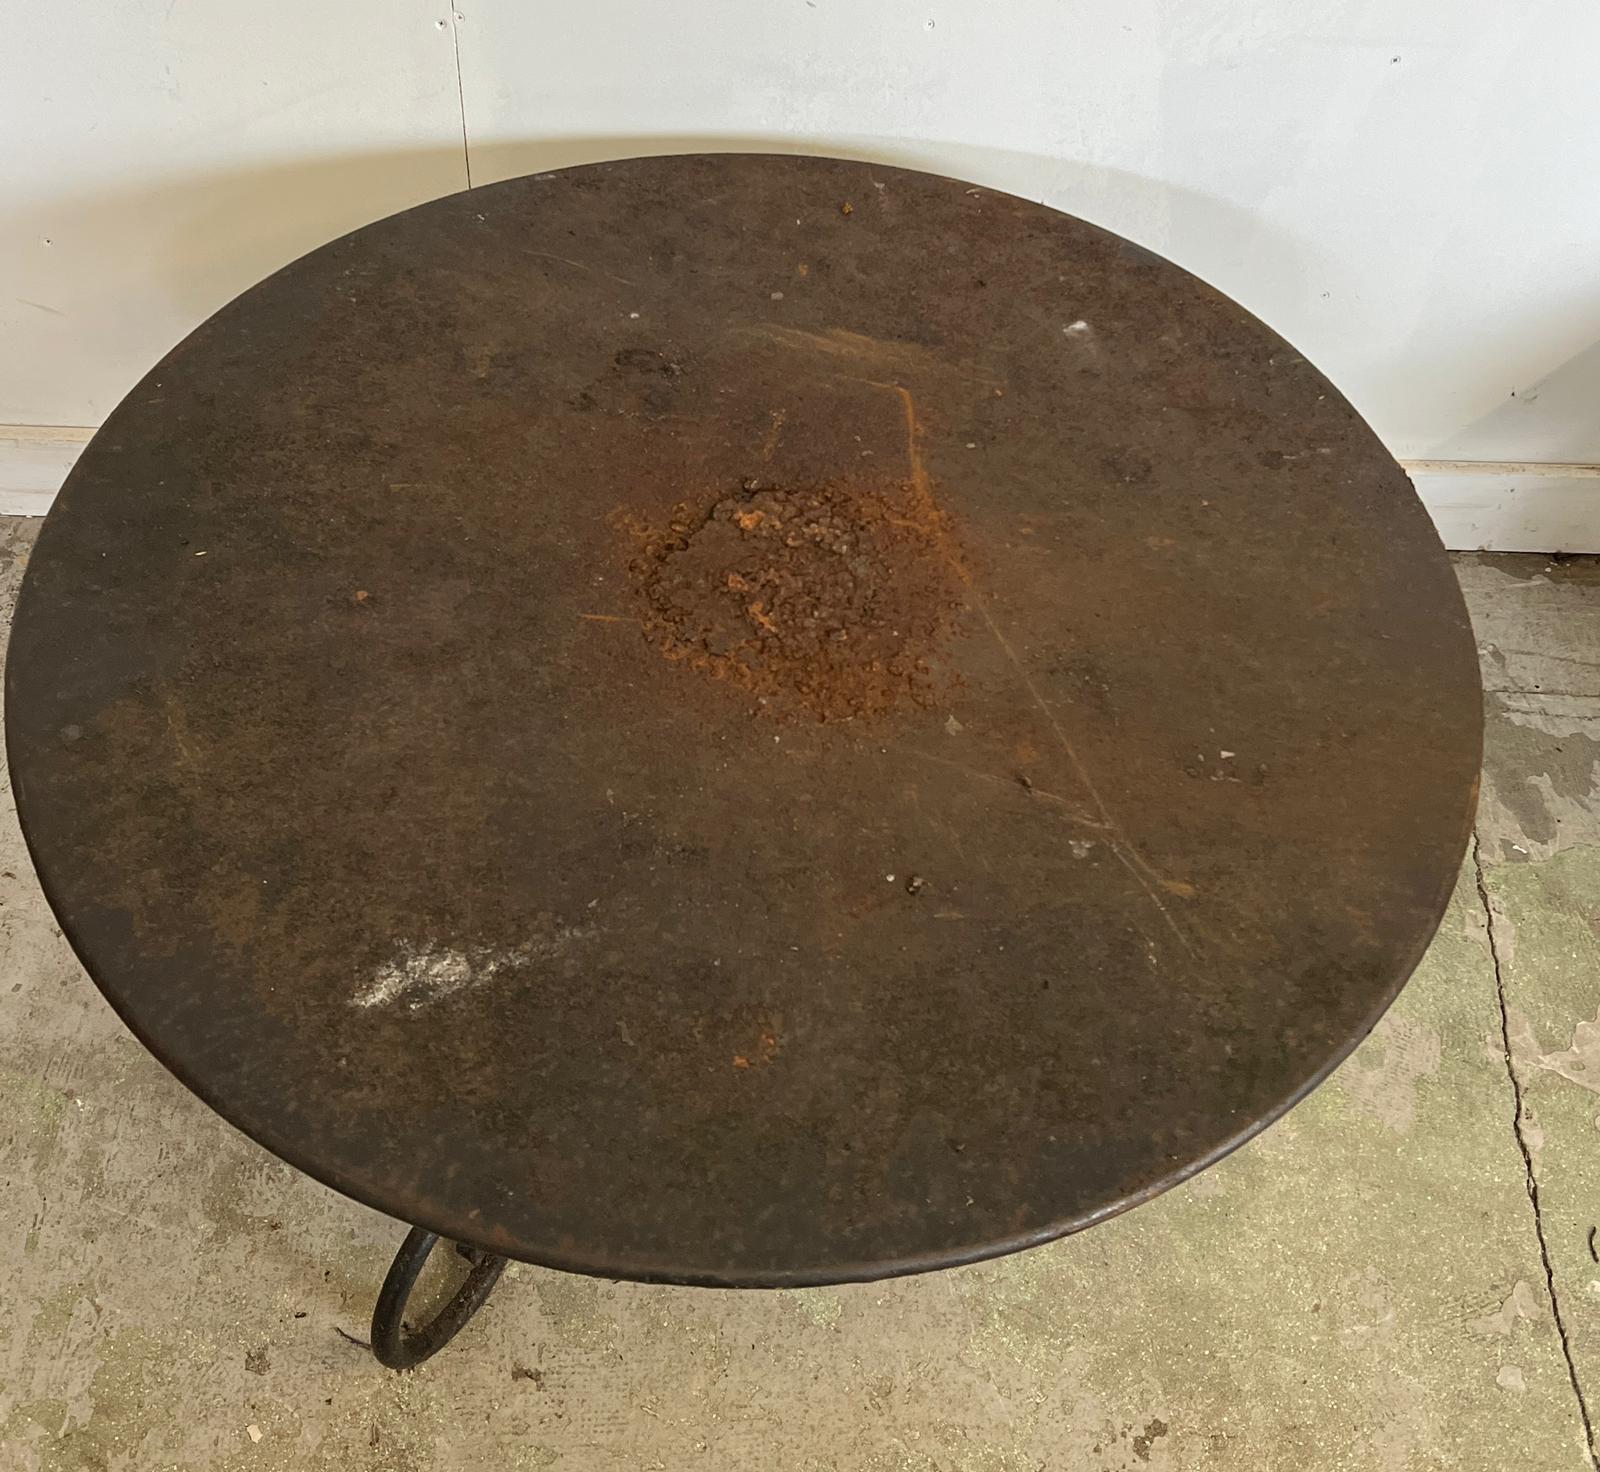 A French style round decorative garden table with scrolling iron work legs (H54cm Dia100cm) - Image 2 of 3